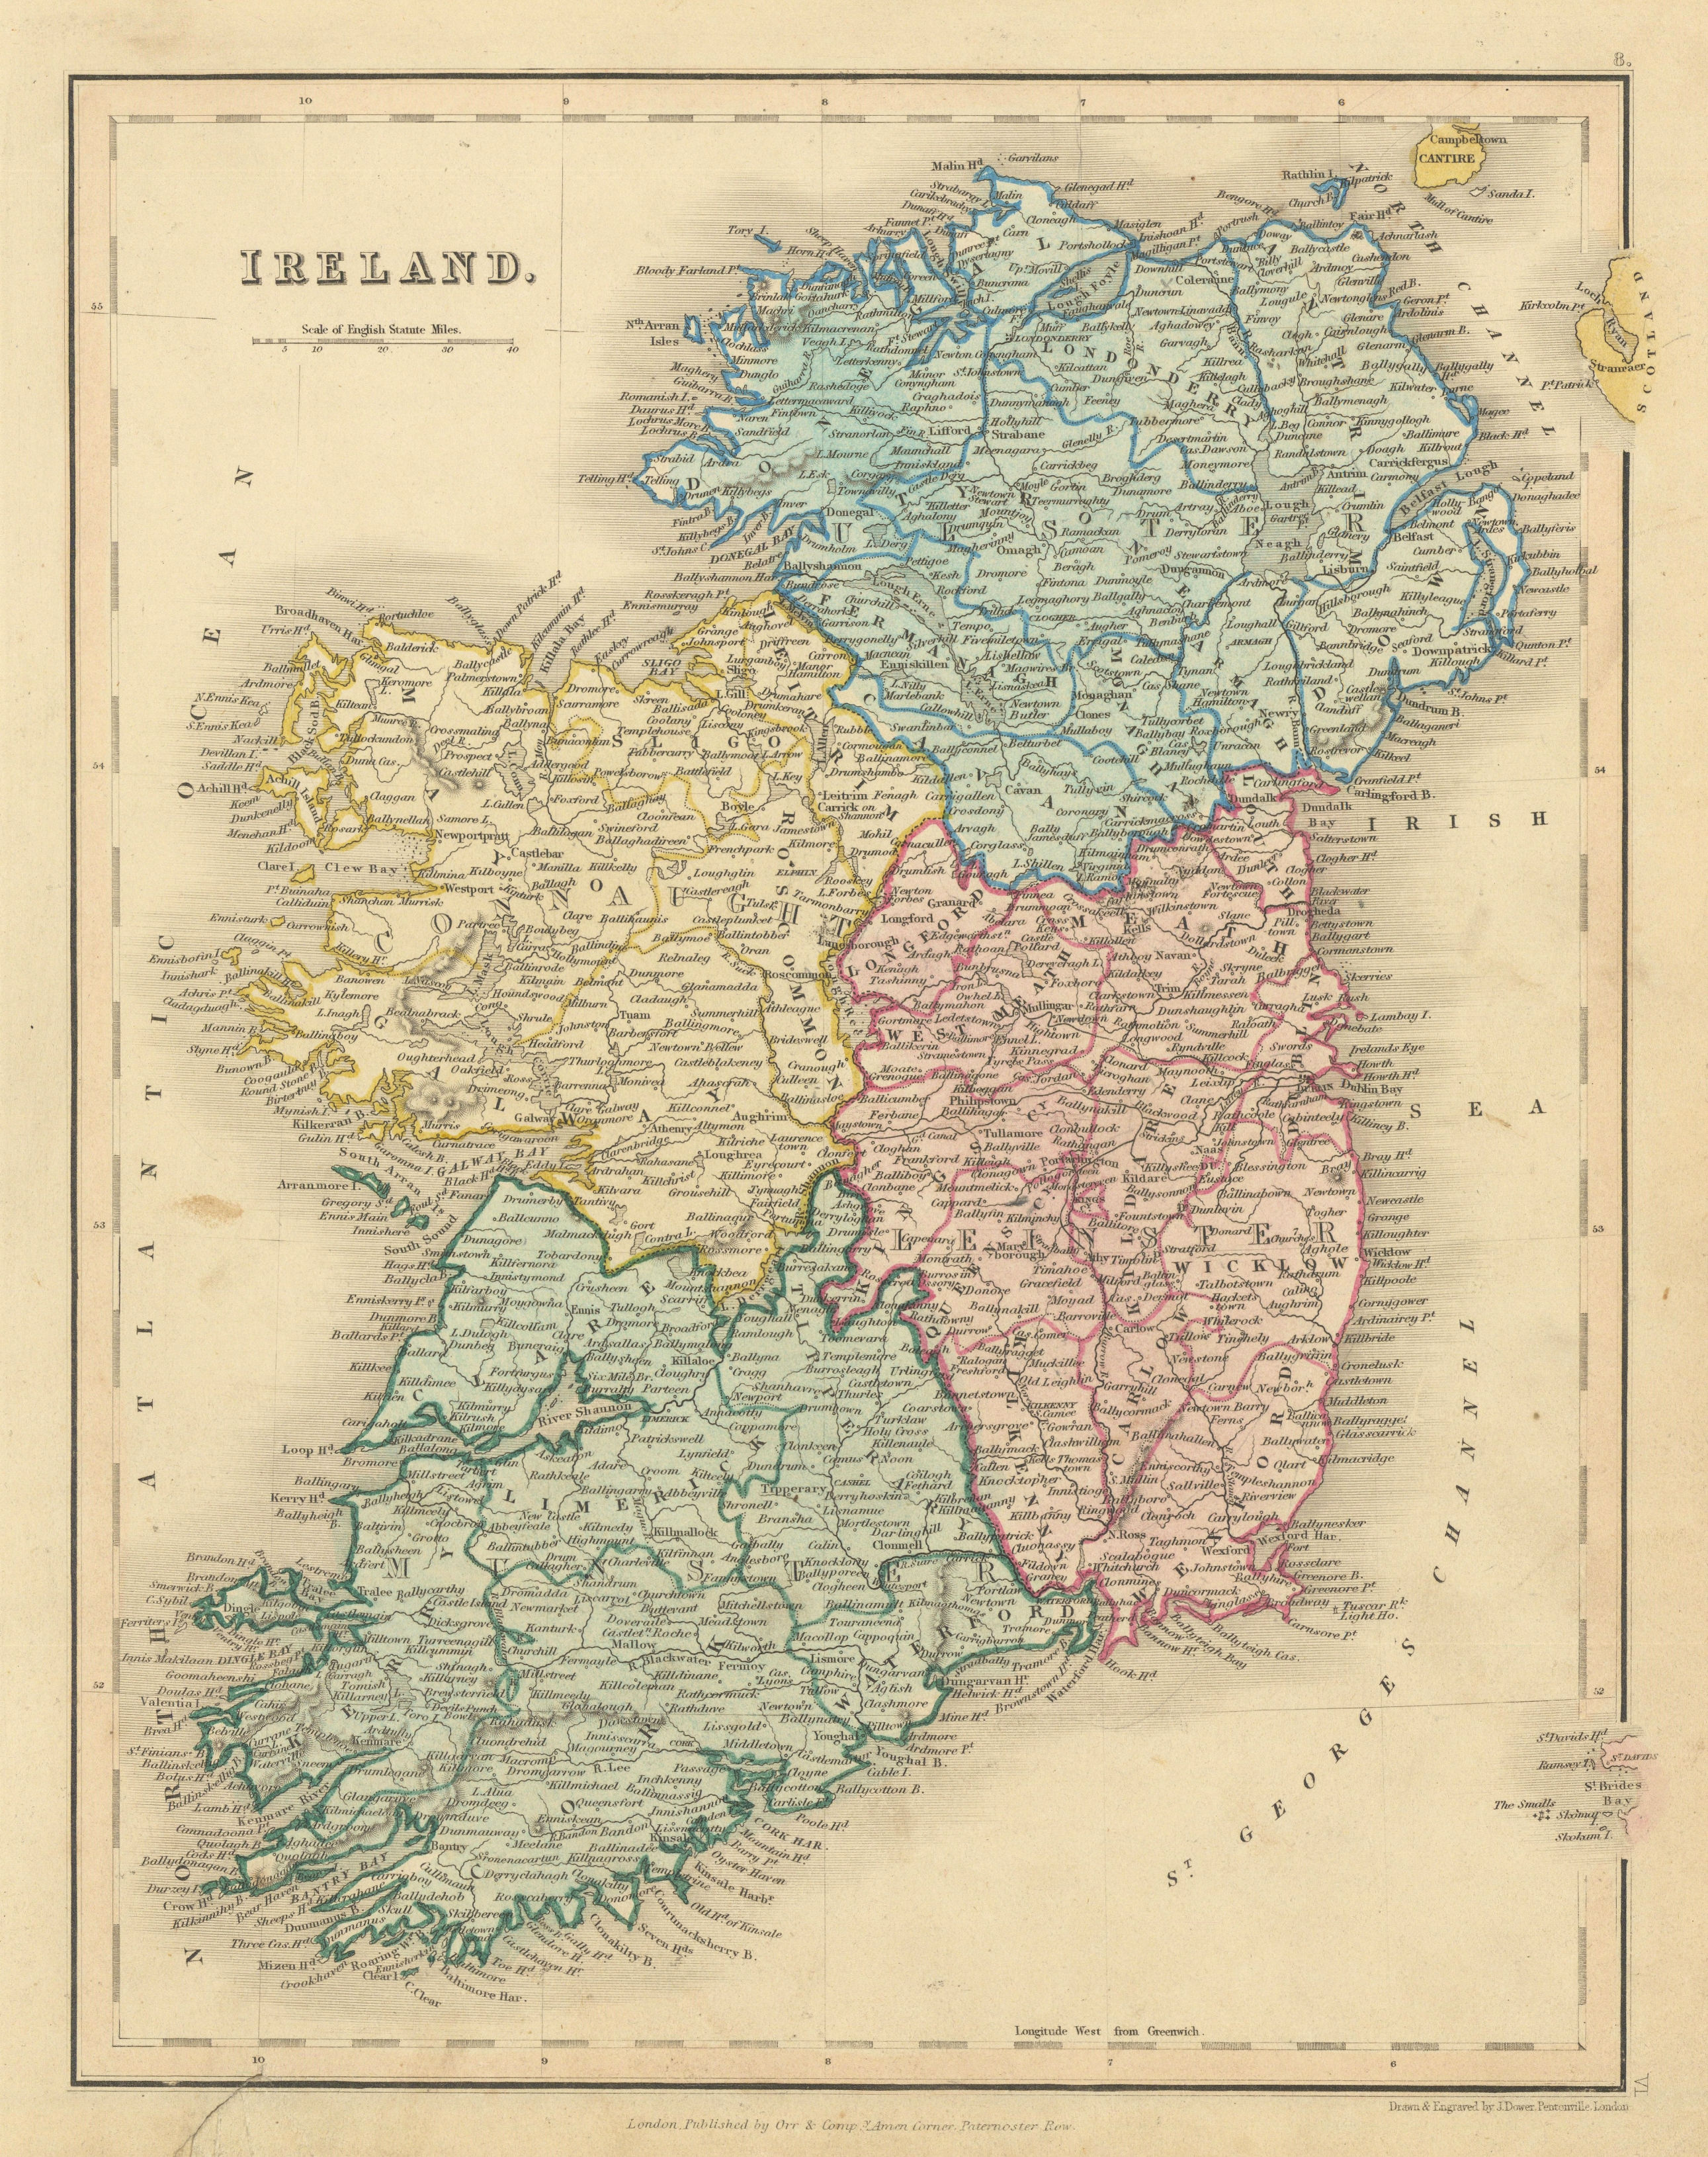 Associate Product Ireland in counties & provinces by John Dower 1845 old antique map plan chart